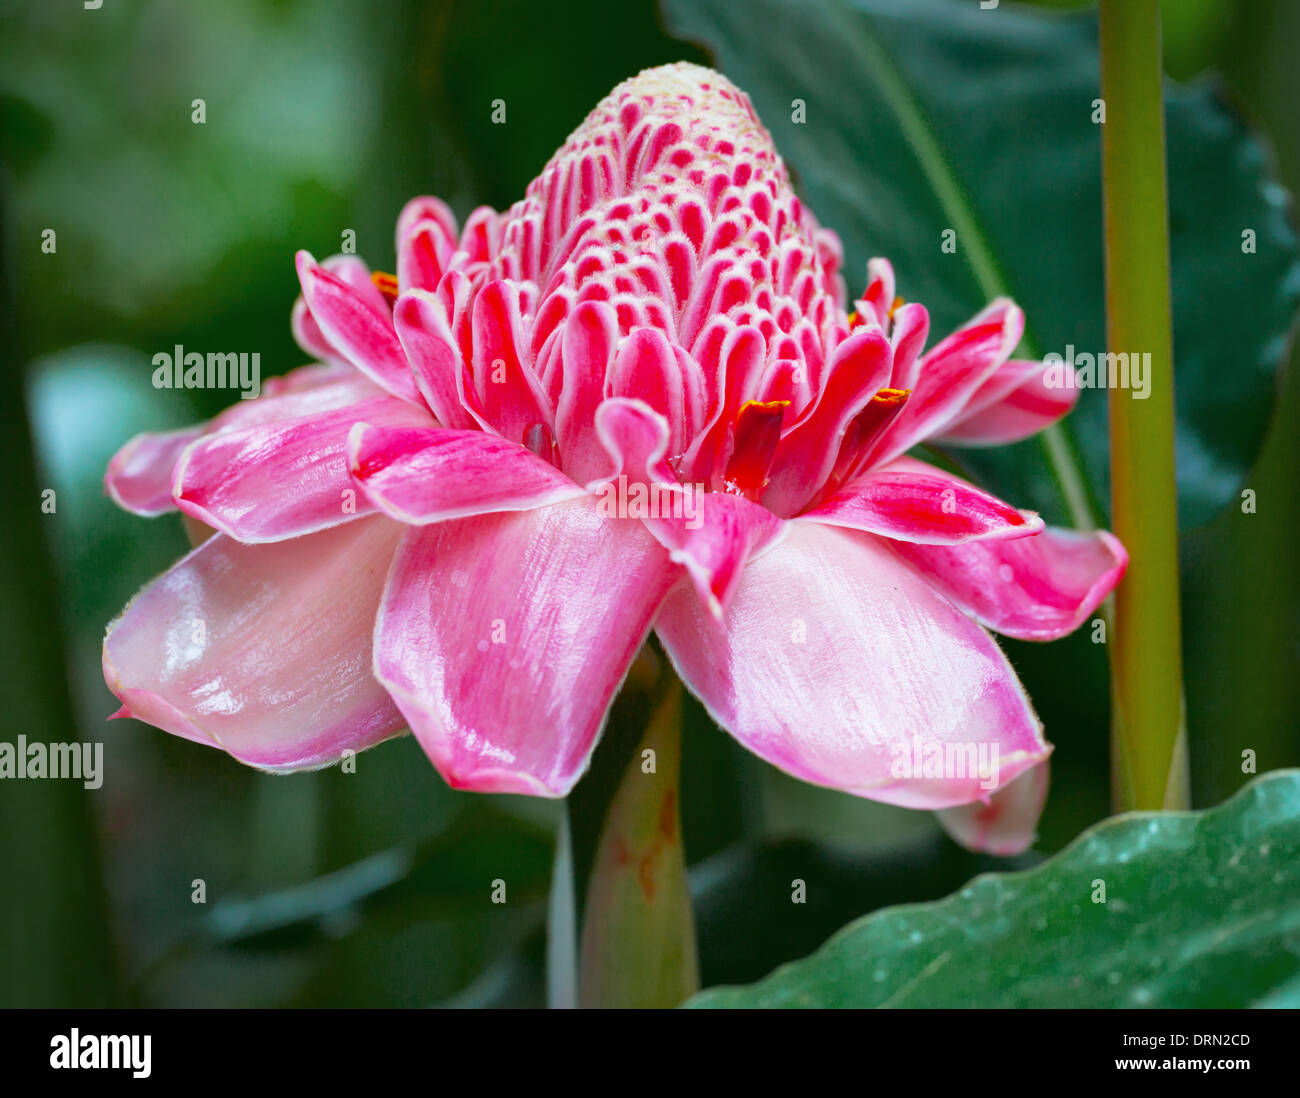 Pink Ginger Flower High Resolution Stock Photography and Images - Alamy